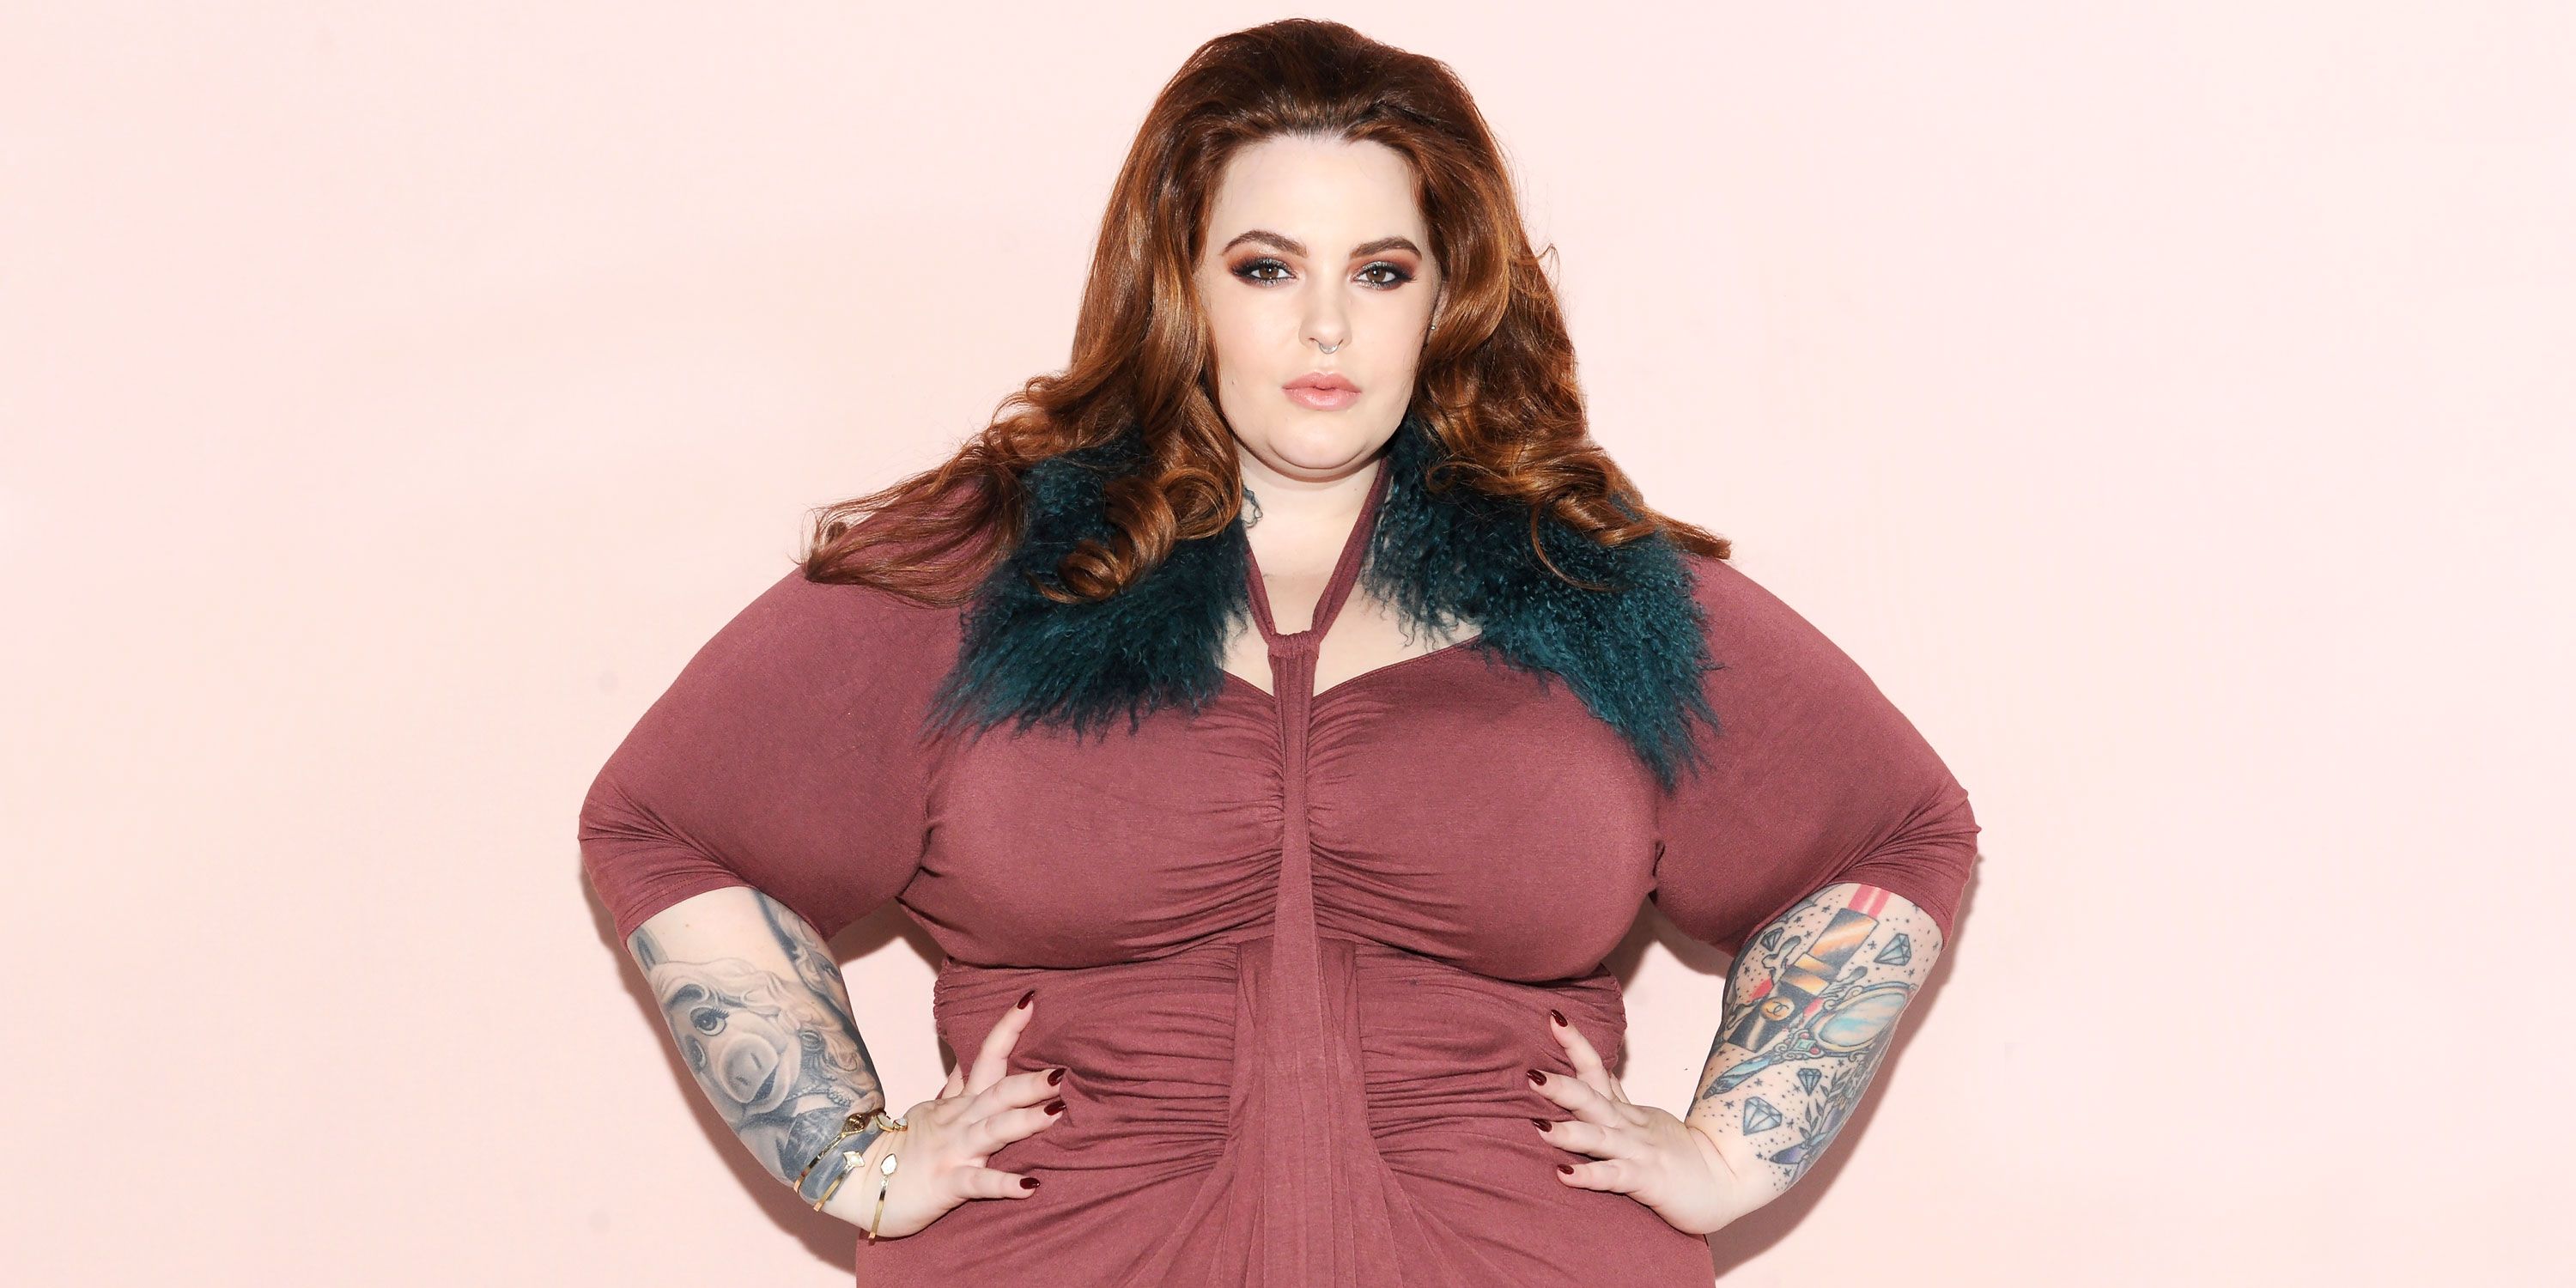 Tess Holliday Wants to 'Normalize' That 'Fat Folks' Enjoy Working Out